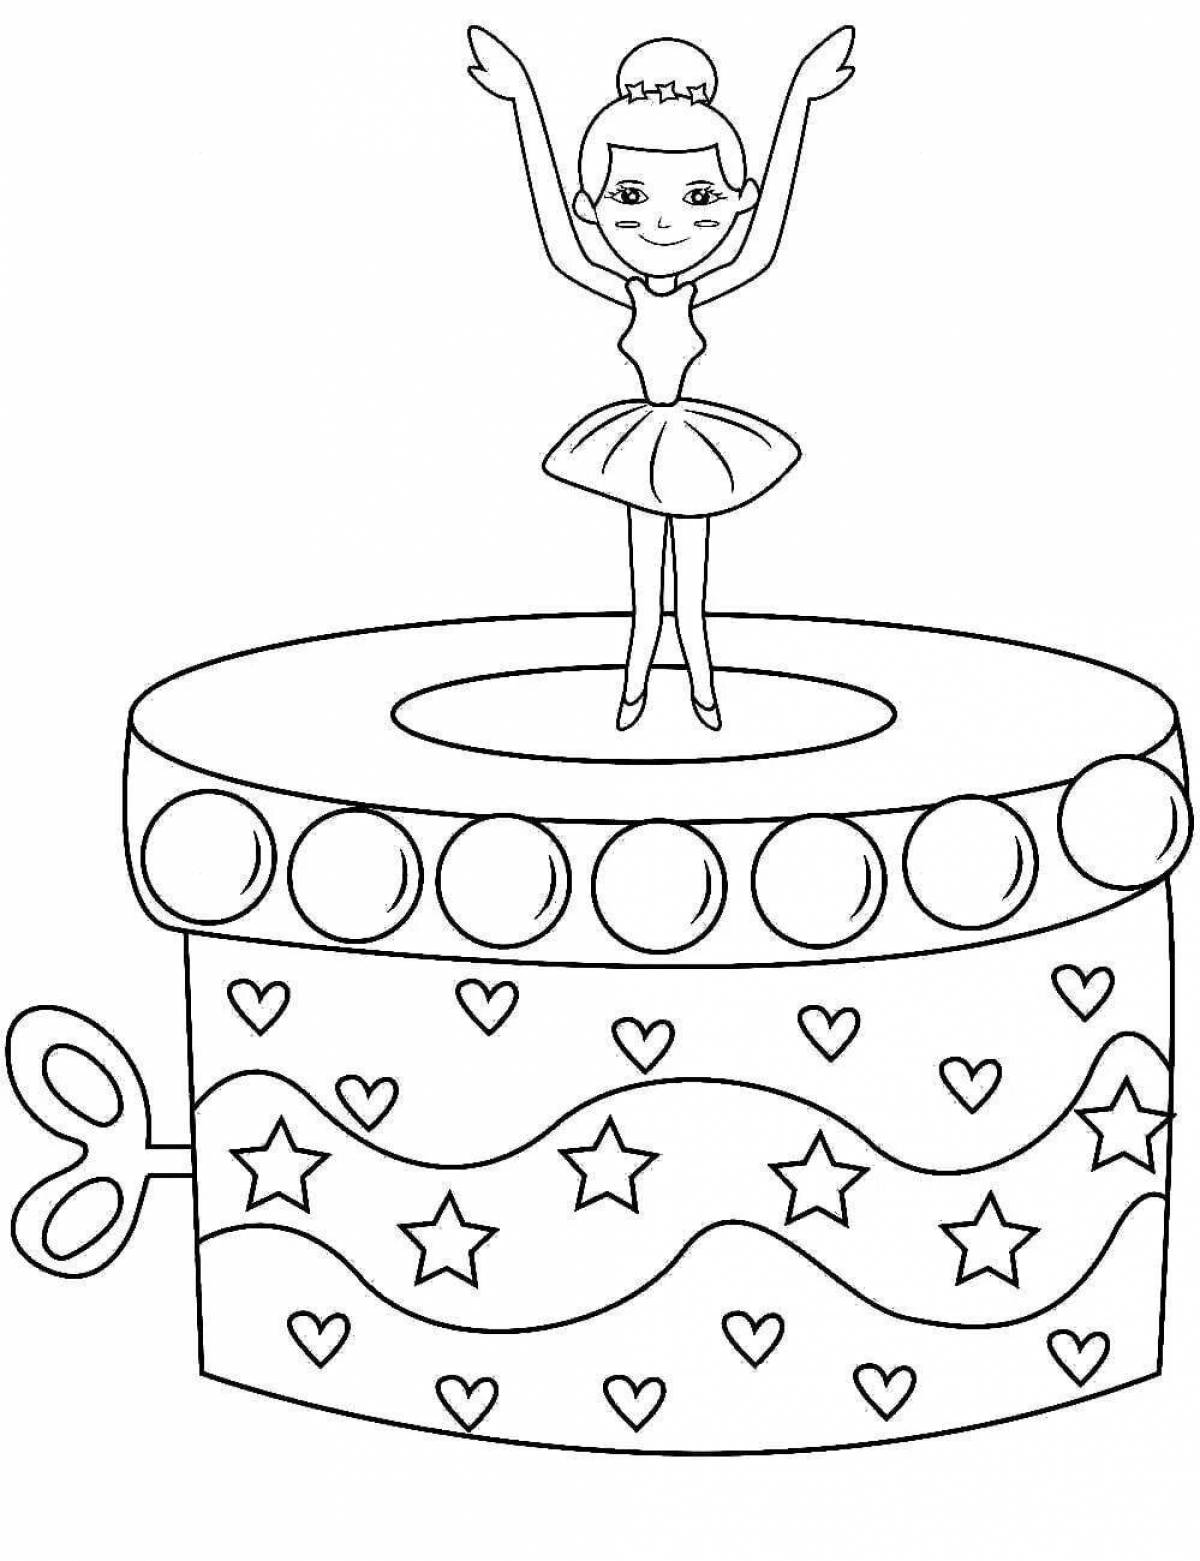 Awesome junior coloring box coloring page